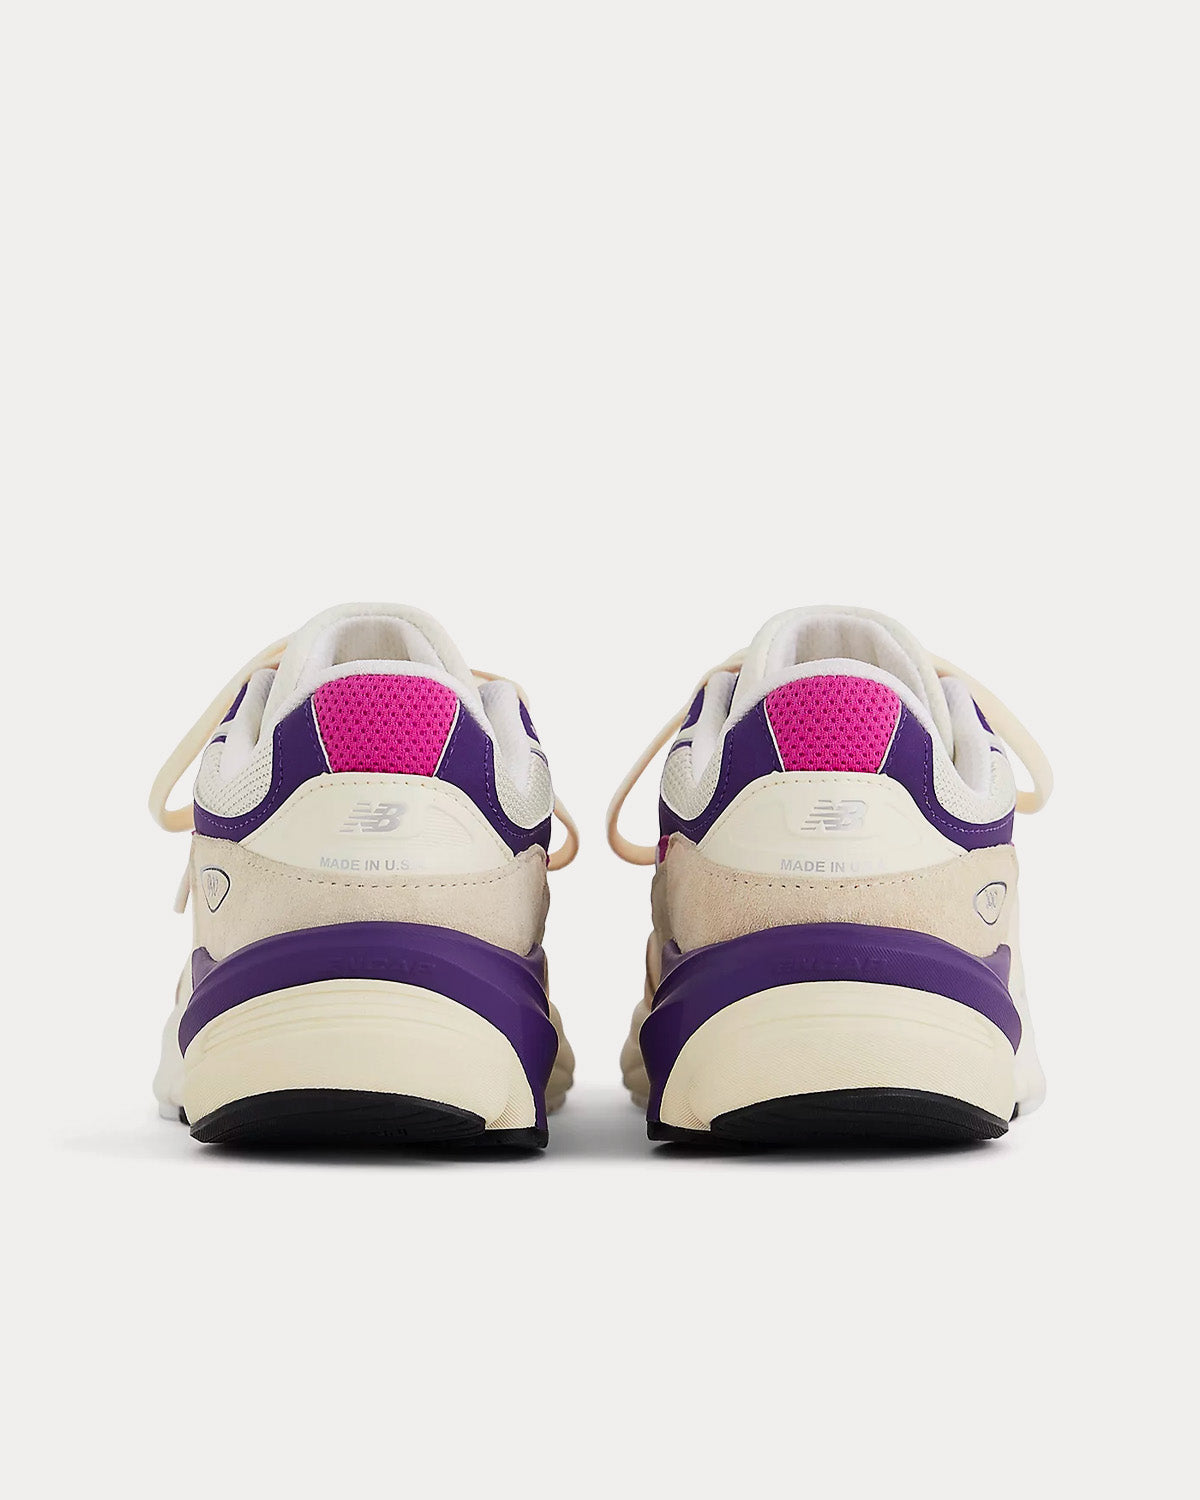 New Balance Made in USA 990v6 Limestone / Magenta Low Top Sneakers ...